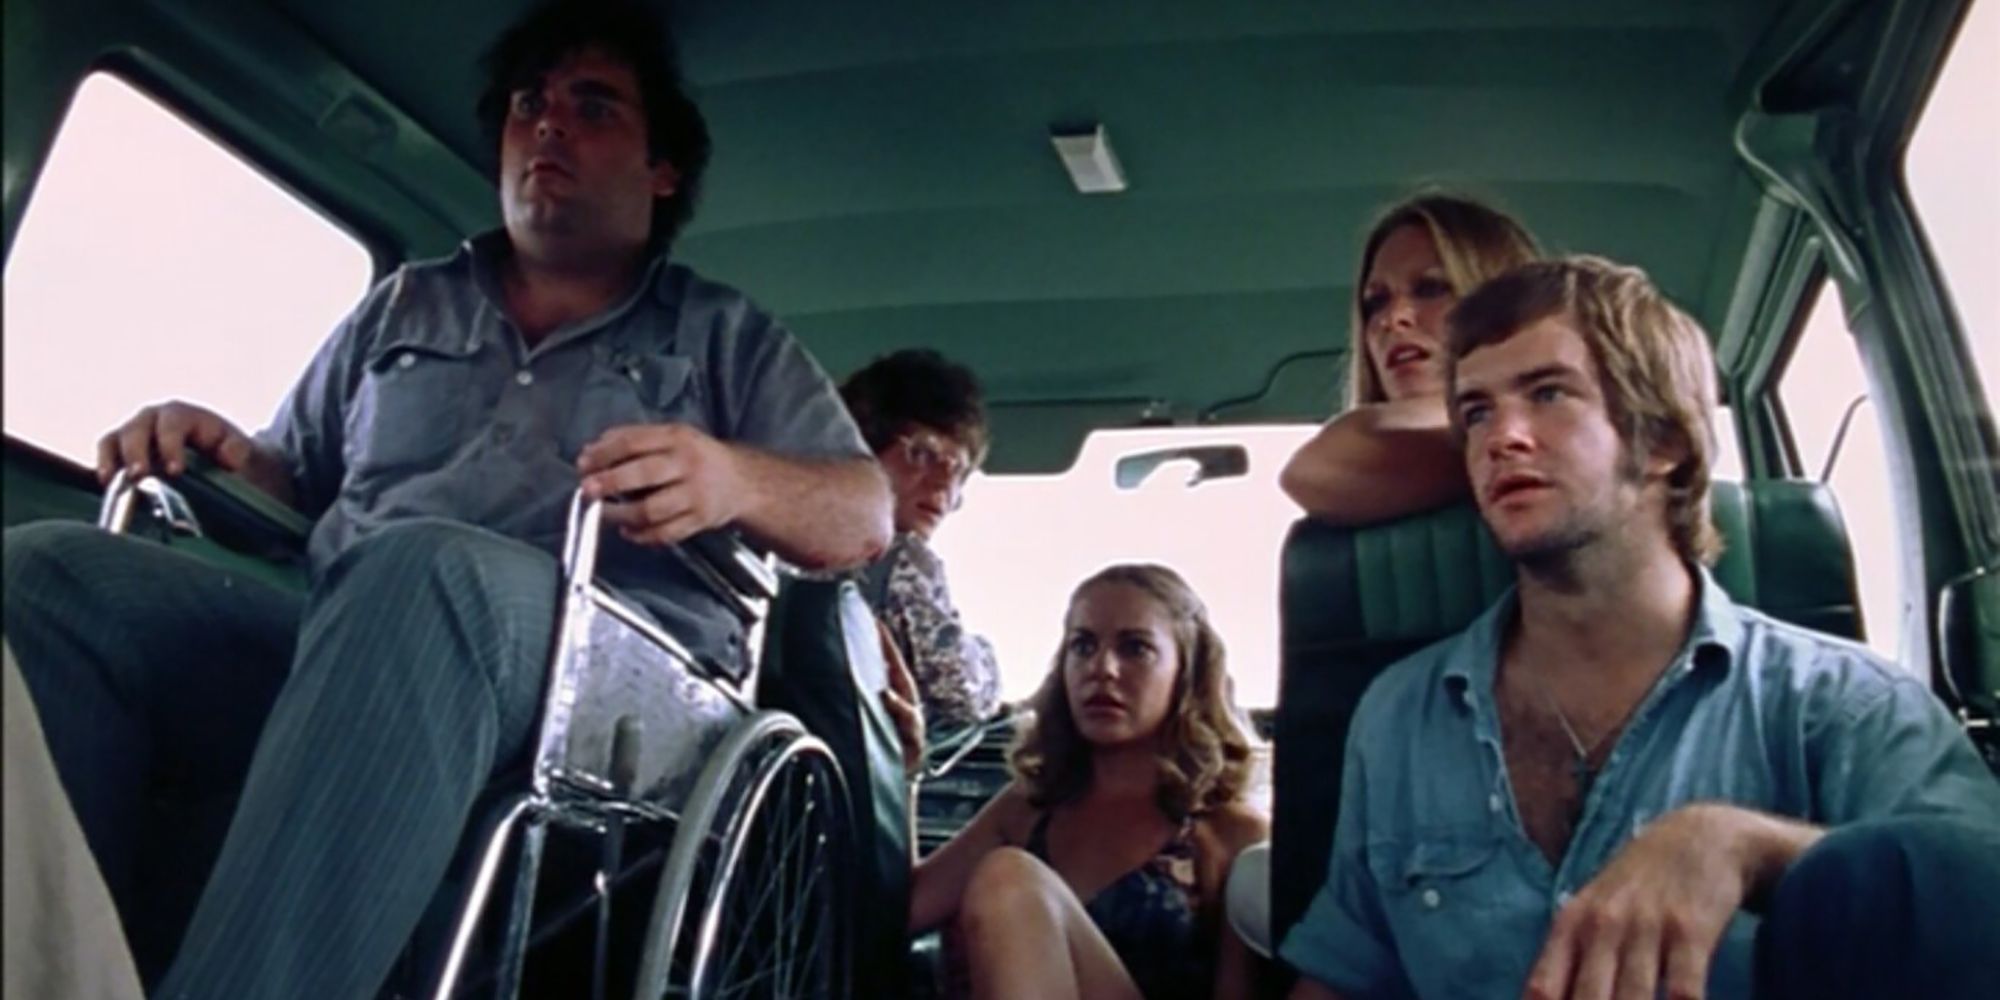 The Cast Of The Texas Chain Saw Massacre